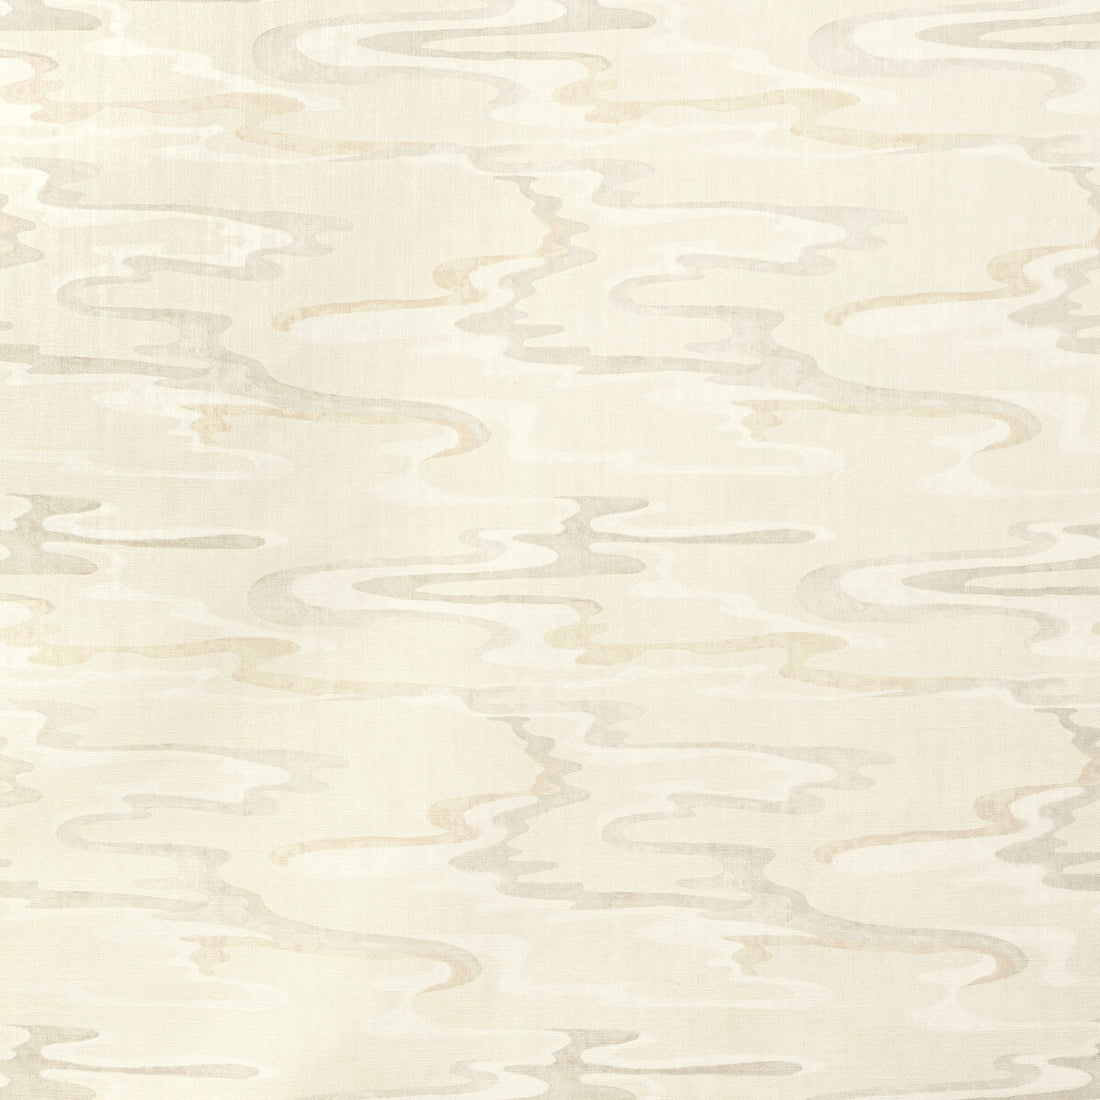 Dreamland fabric in oyster color - pattern DREAMLAND.106.0 - by Kravet Basics in the Candice Olson collection